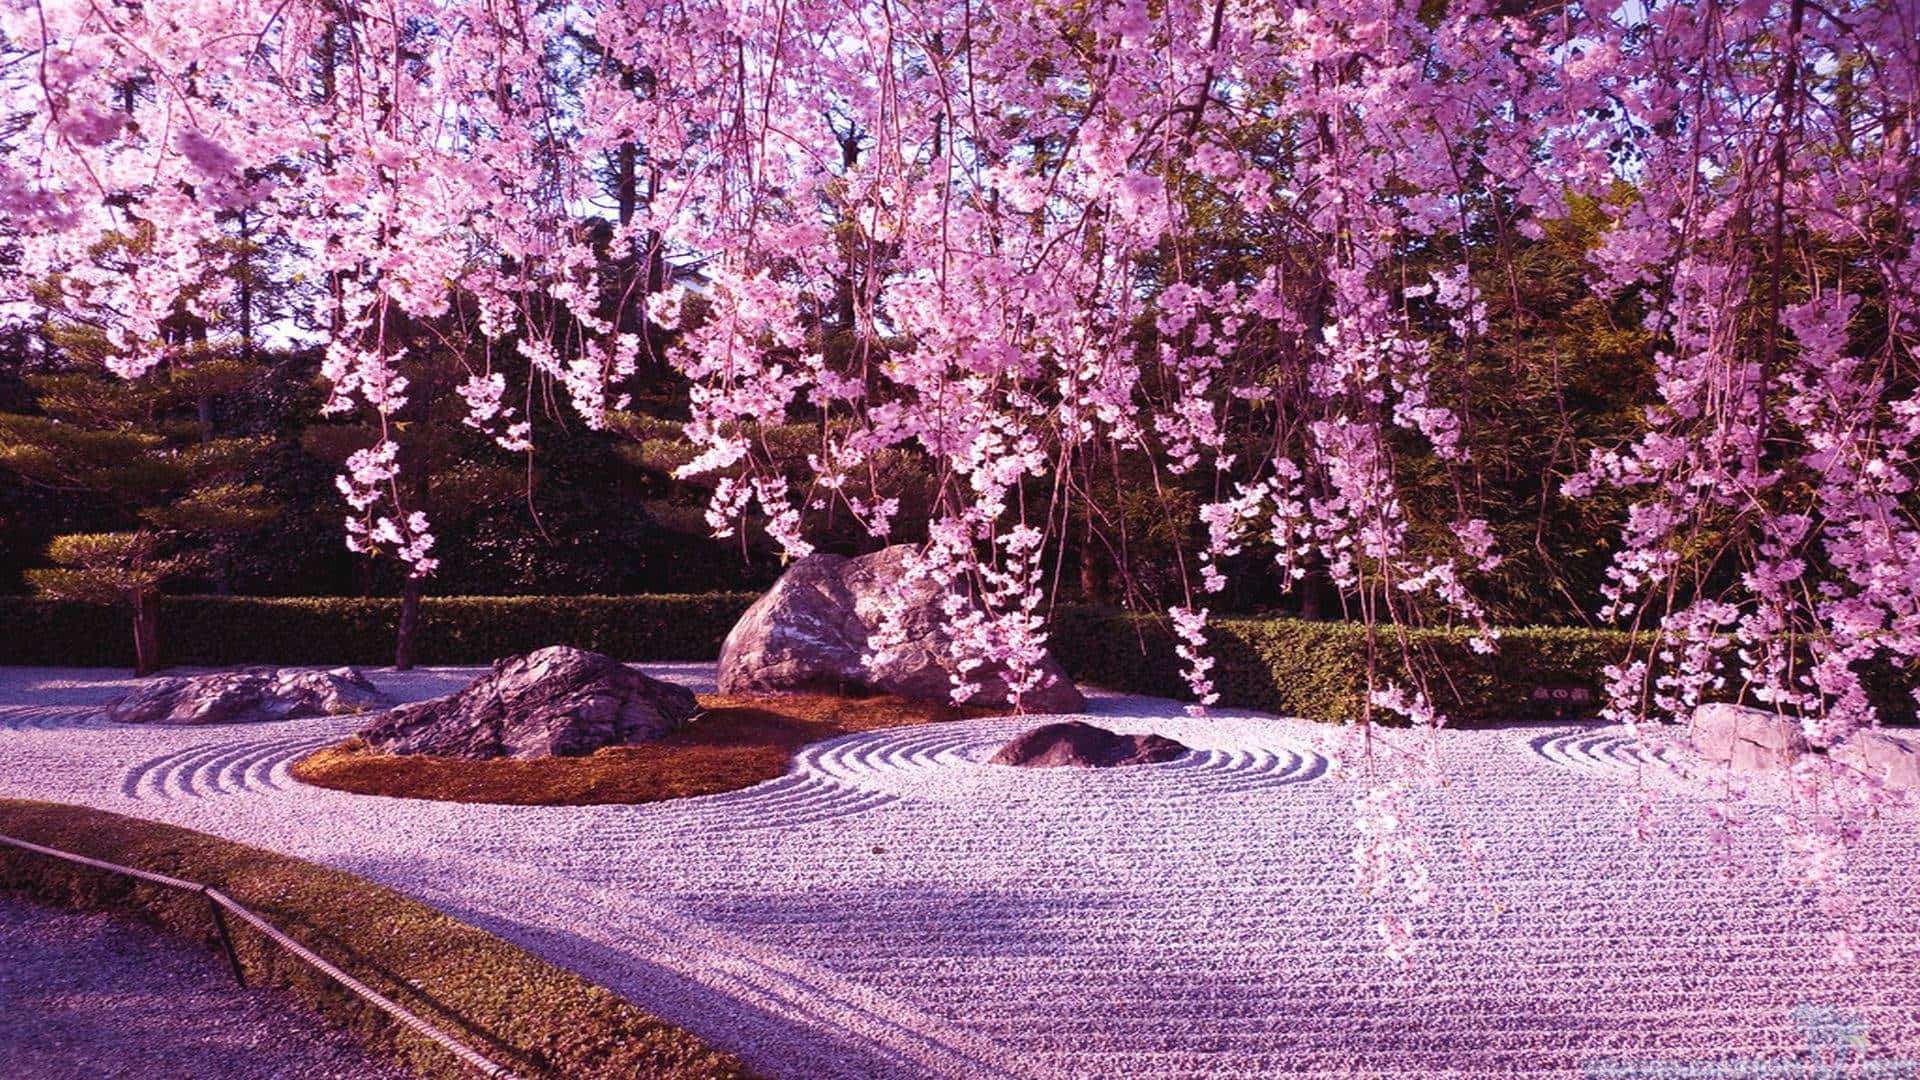 A garden with pink flowers and rocks - Cherry blossom